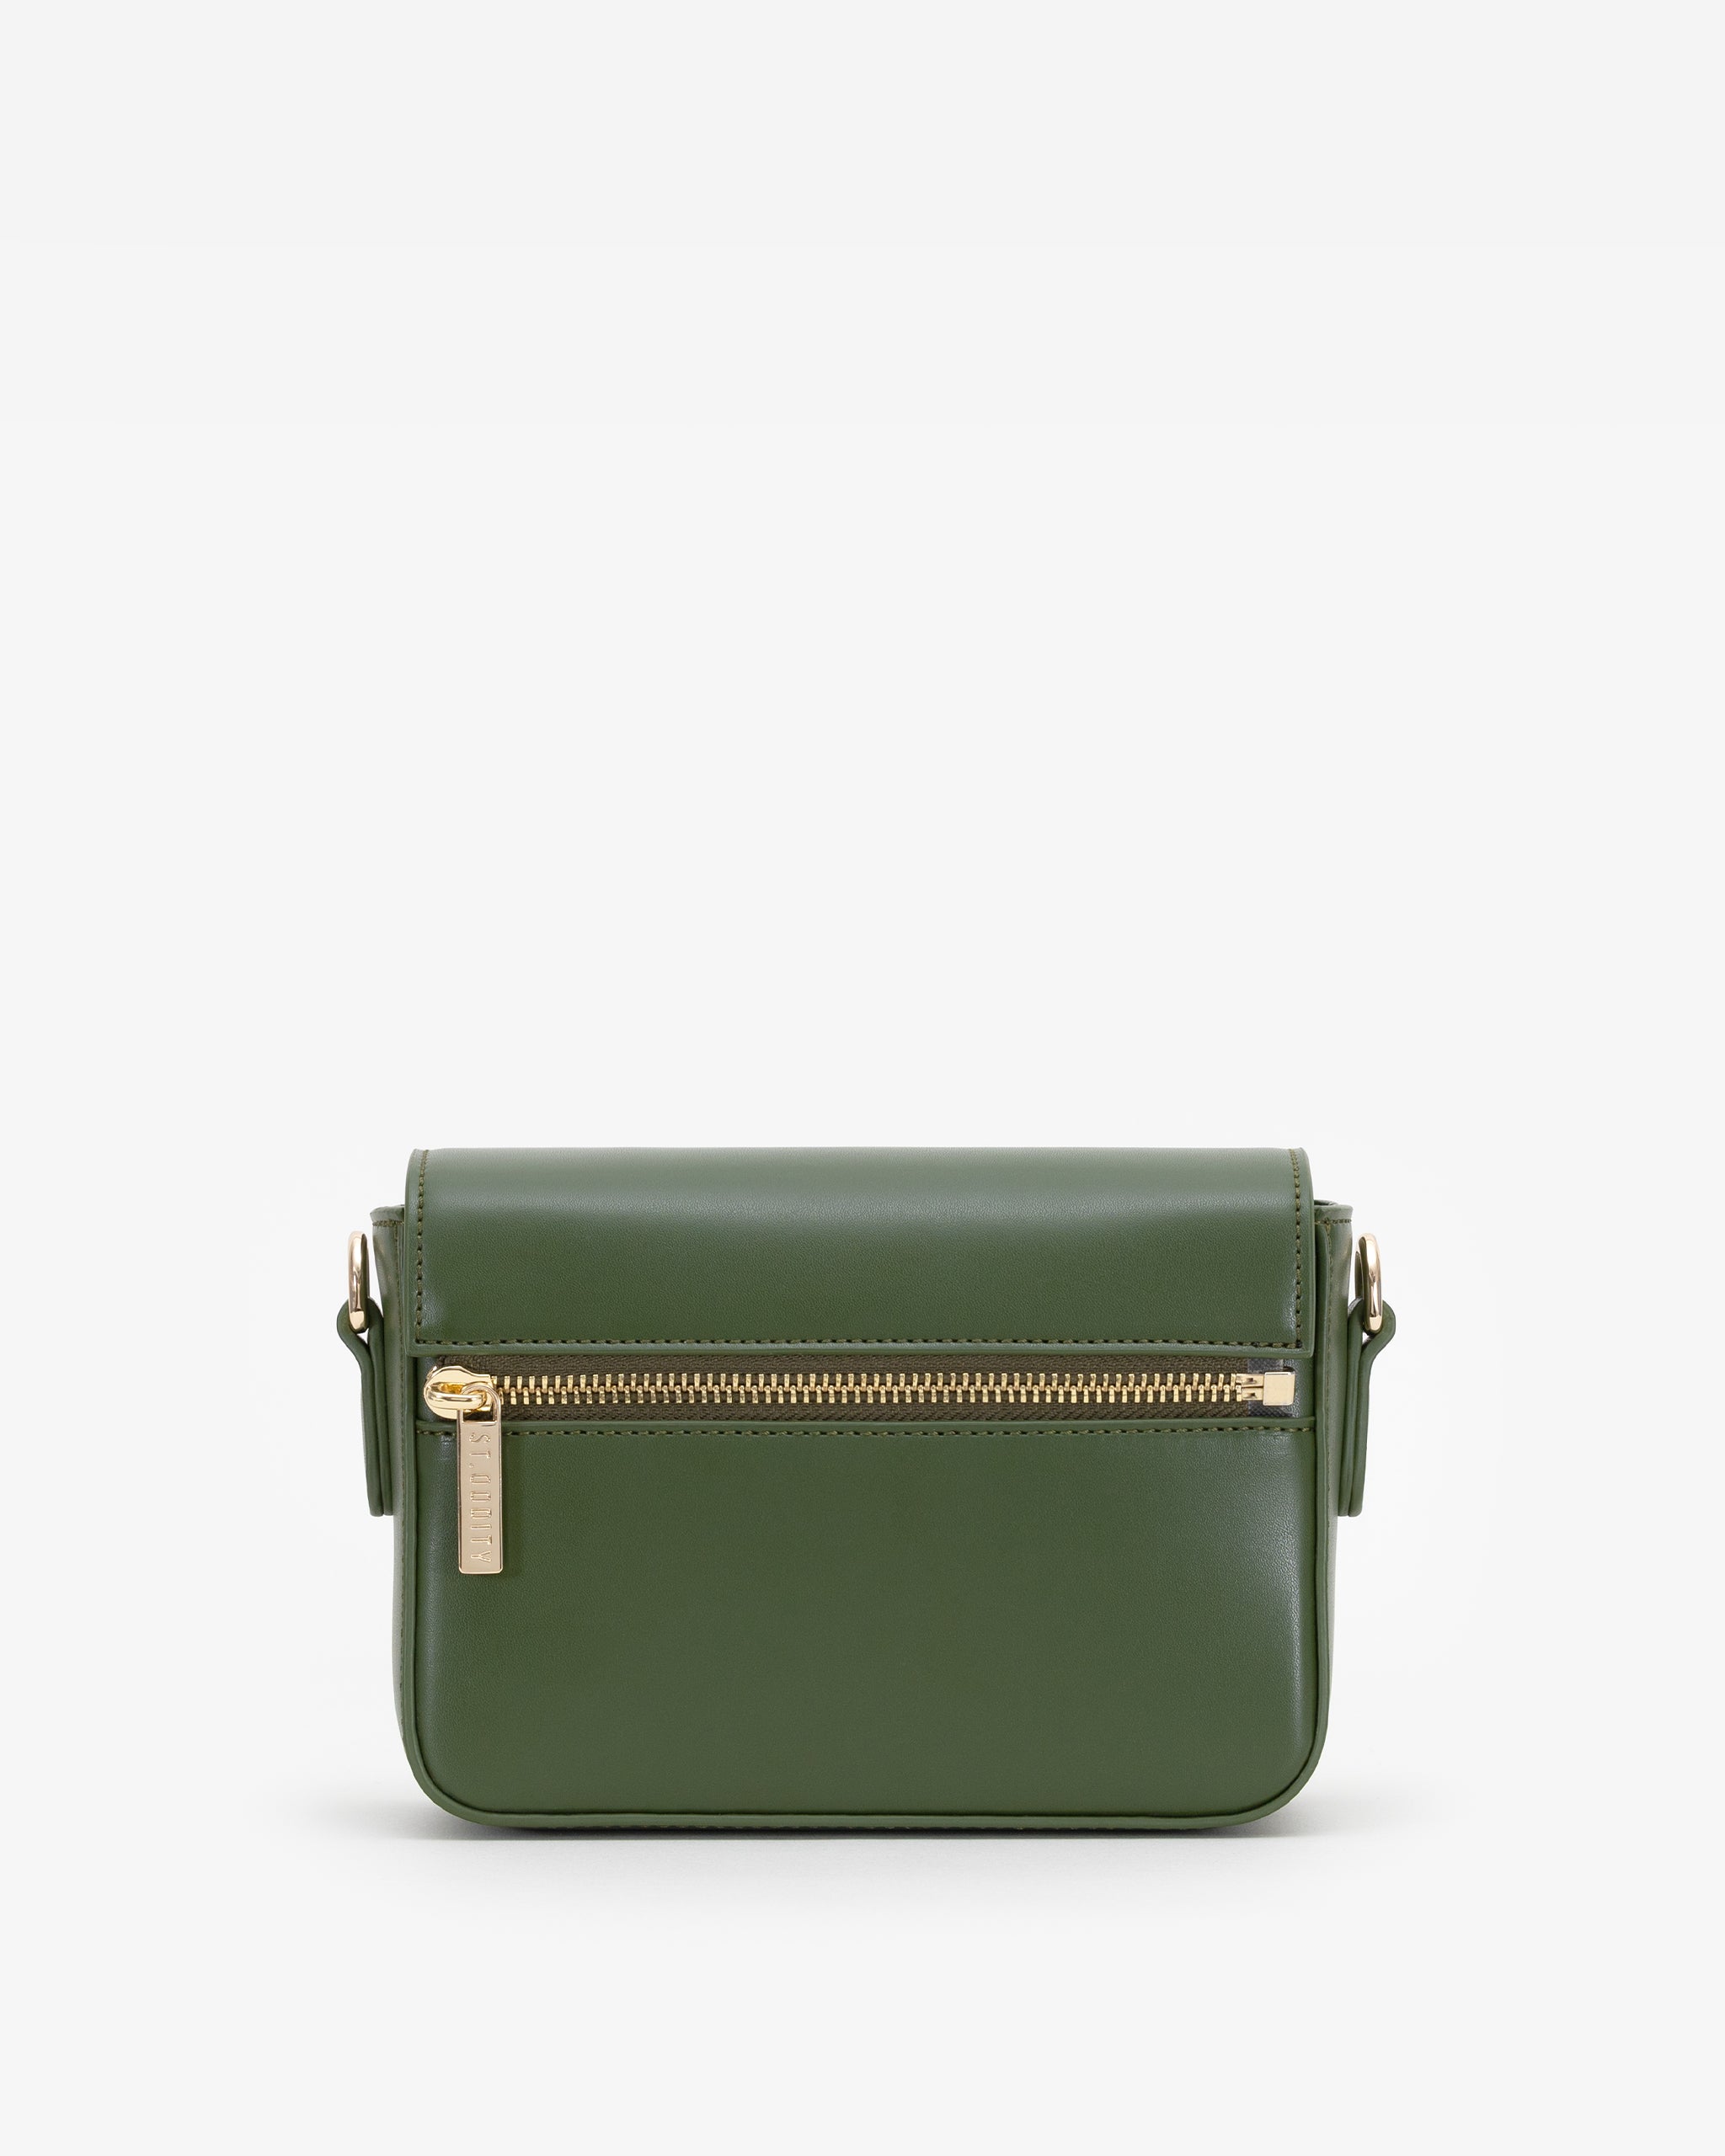 Crossbody Bag in Khaki Green with Personalised Hardware